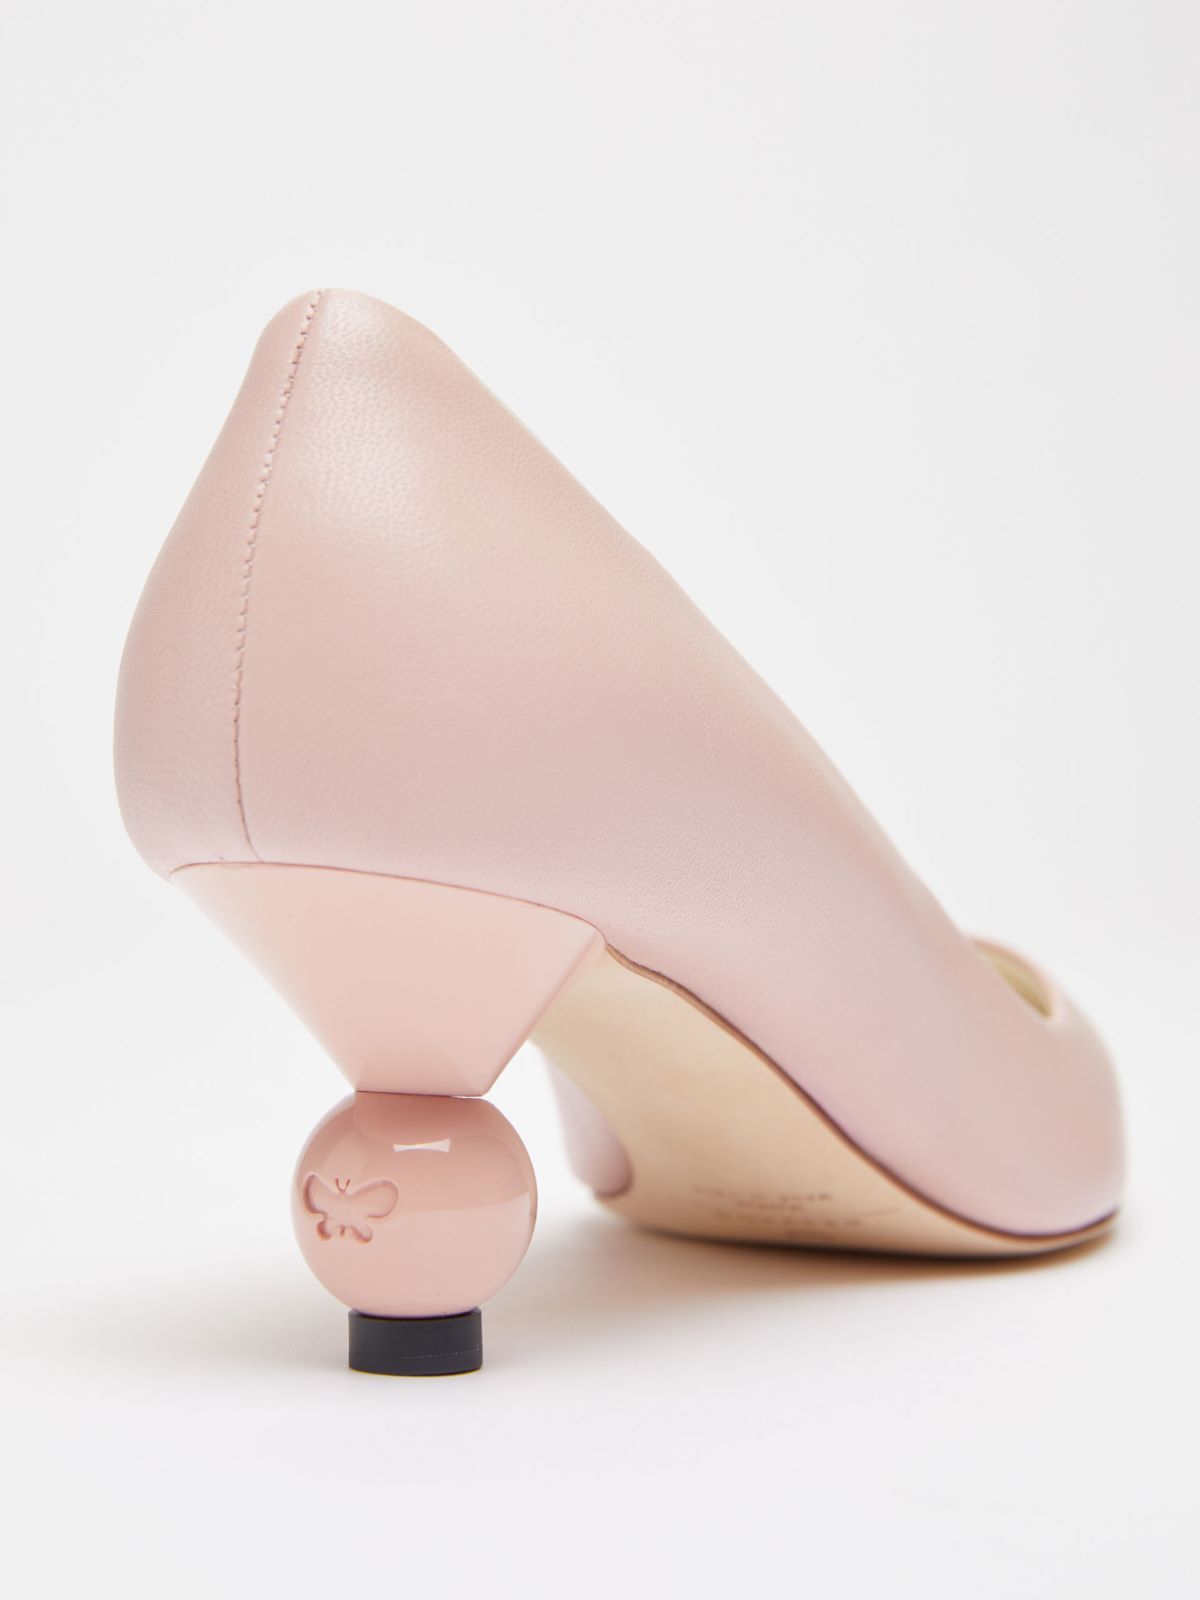 Nappa leather court shoes - ANTIQUE ROSE - Weekend Max Mara - 4